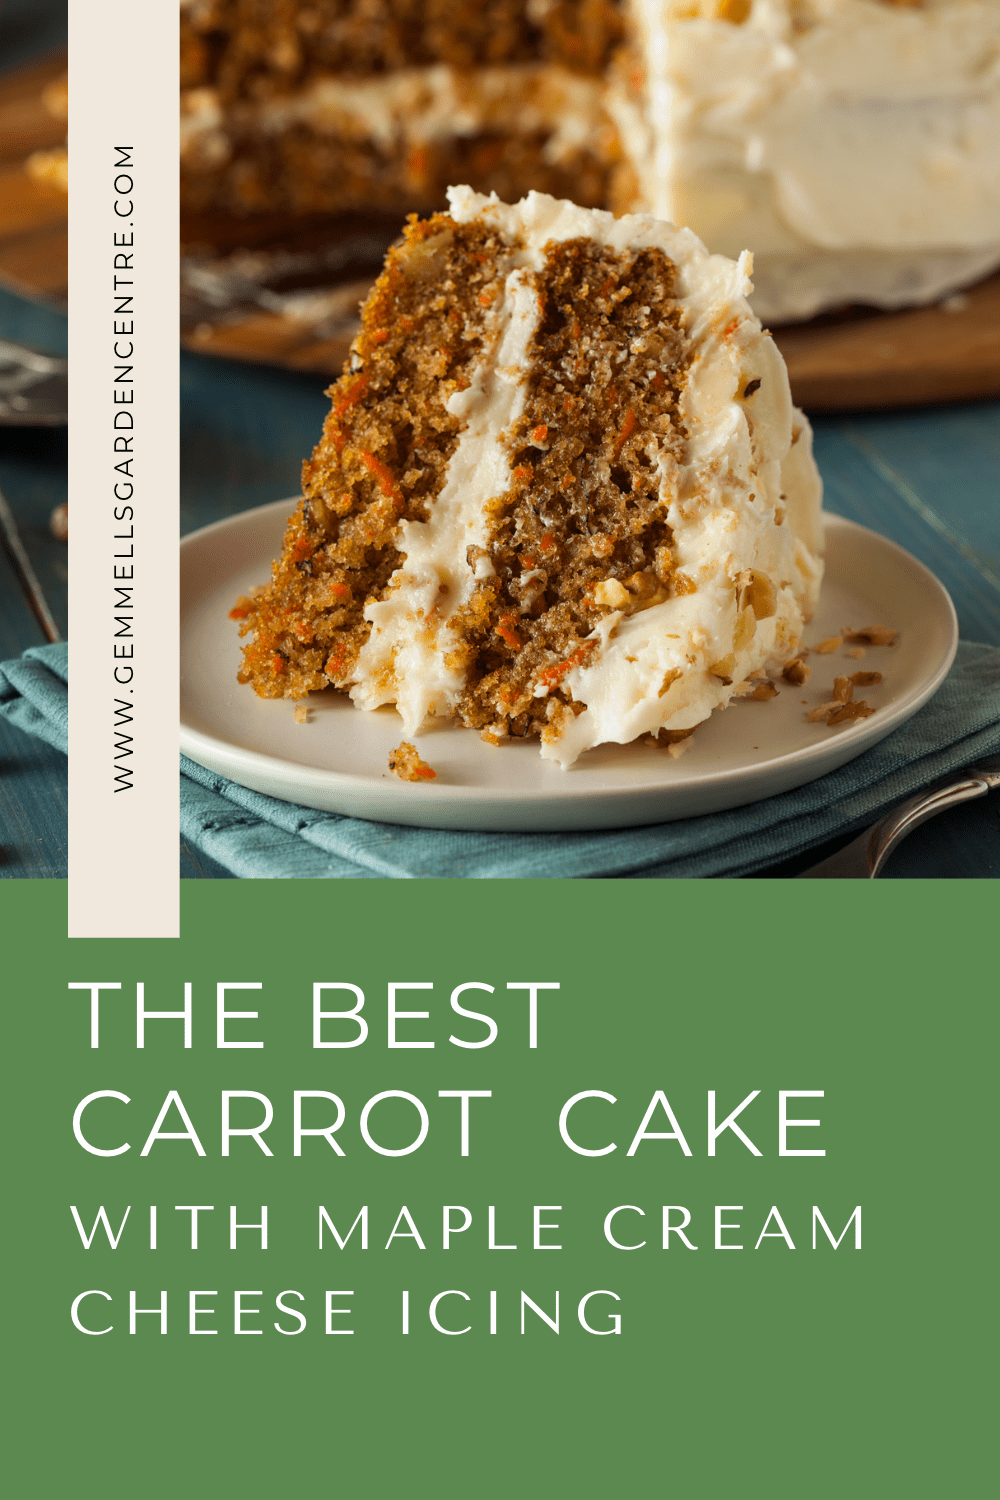 Best Carrot Cake with Maple Cream Cheese Icing